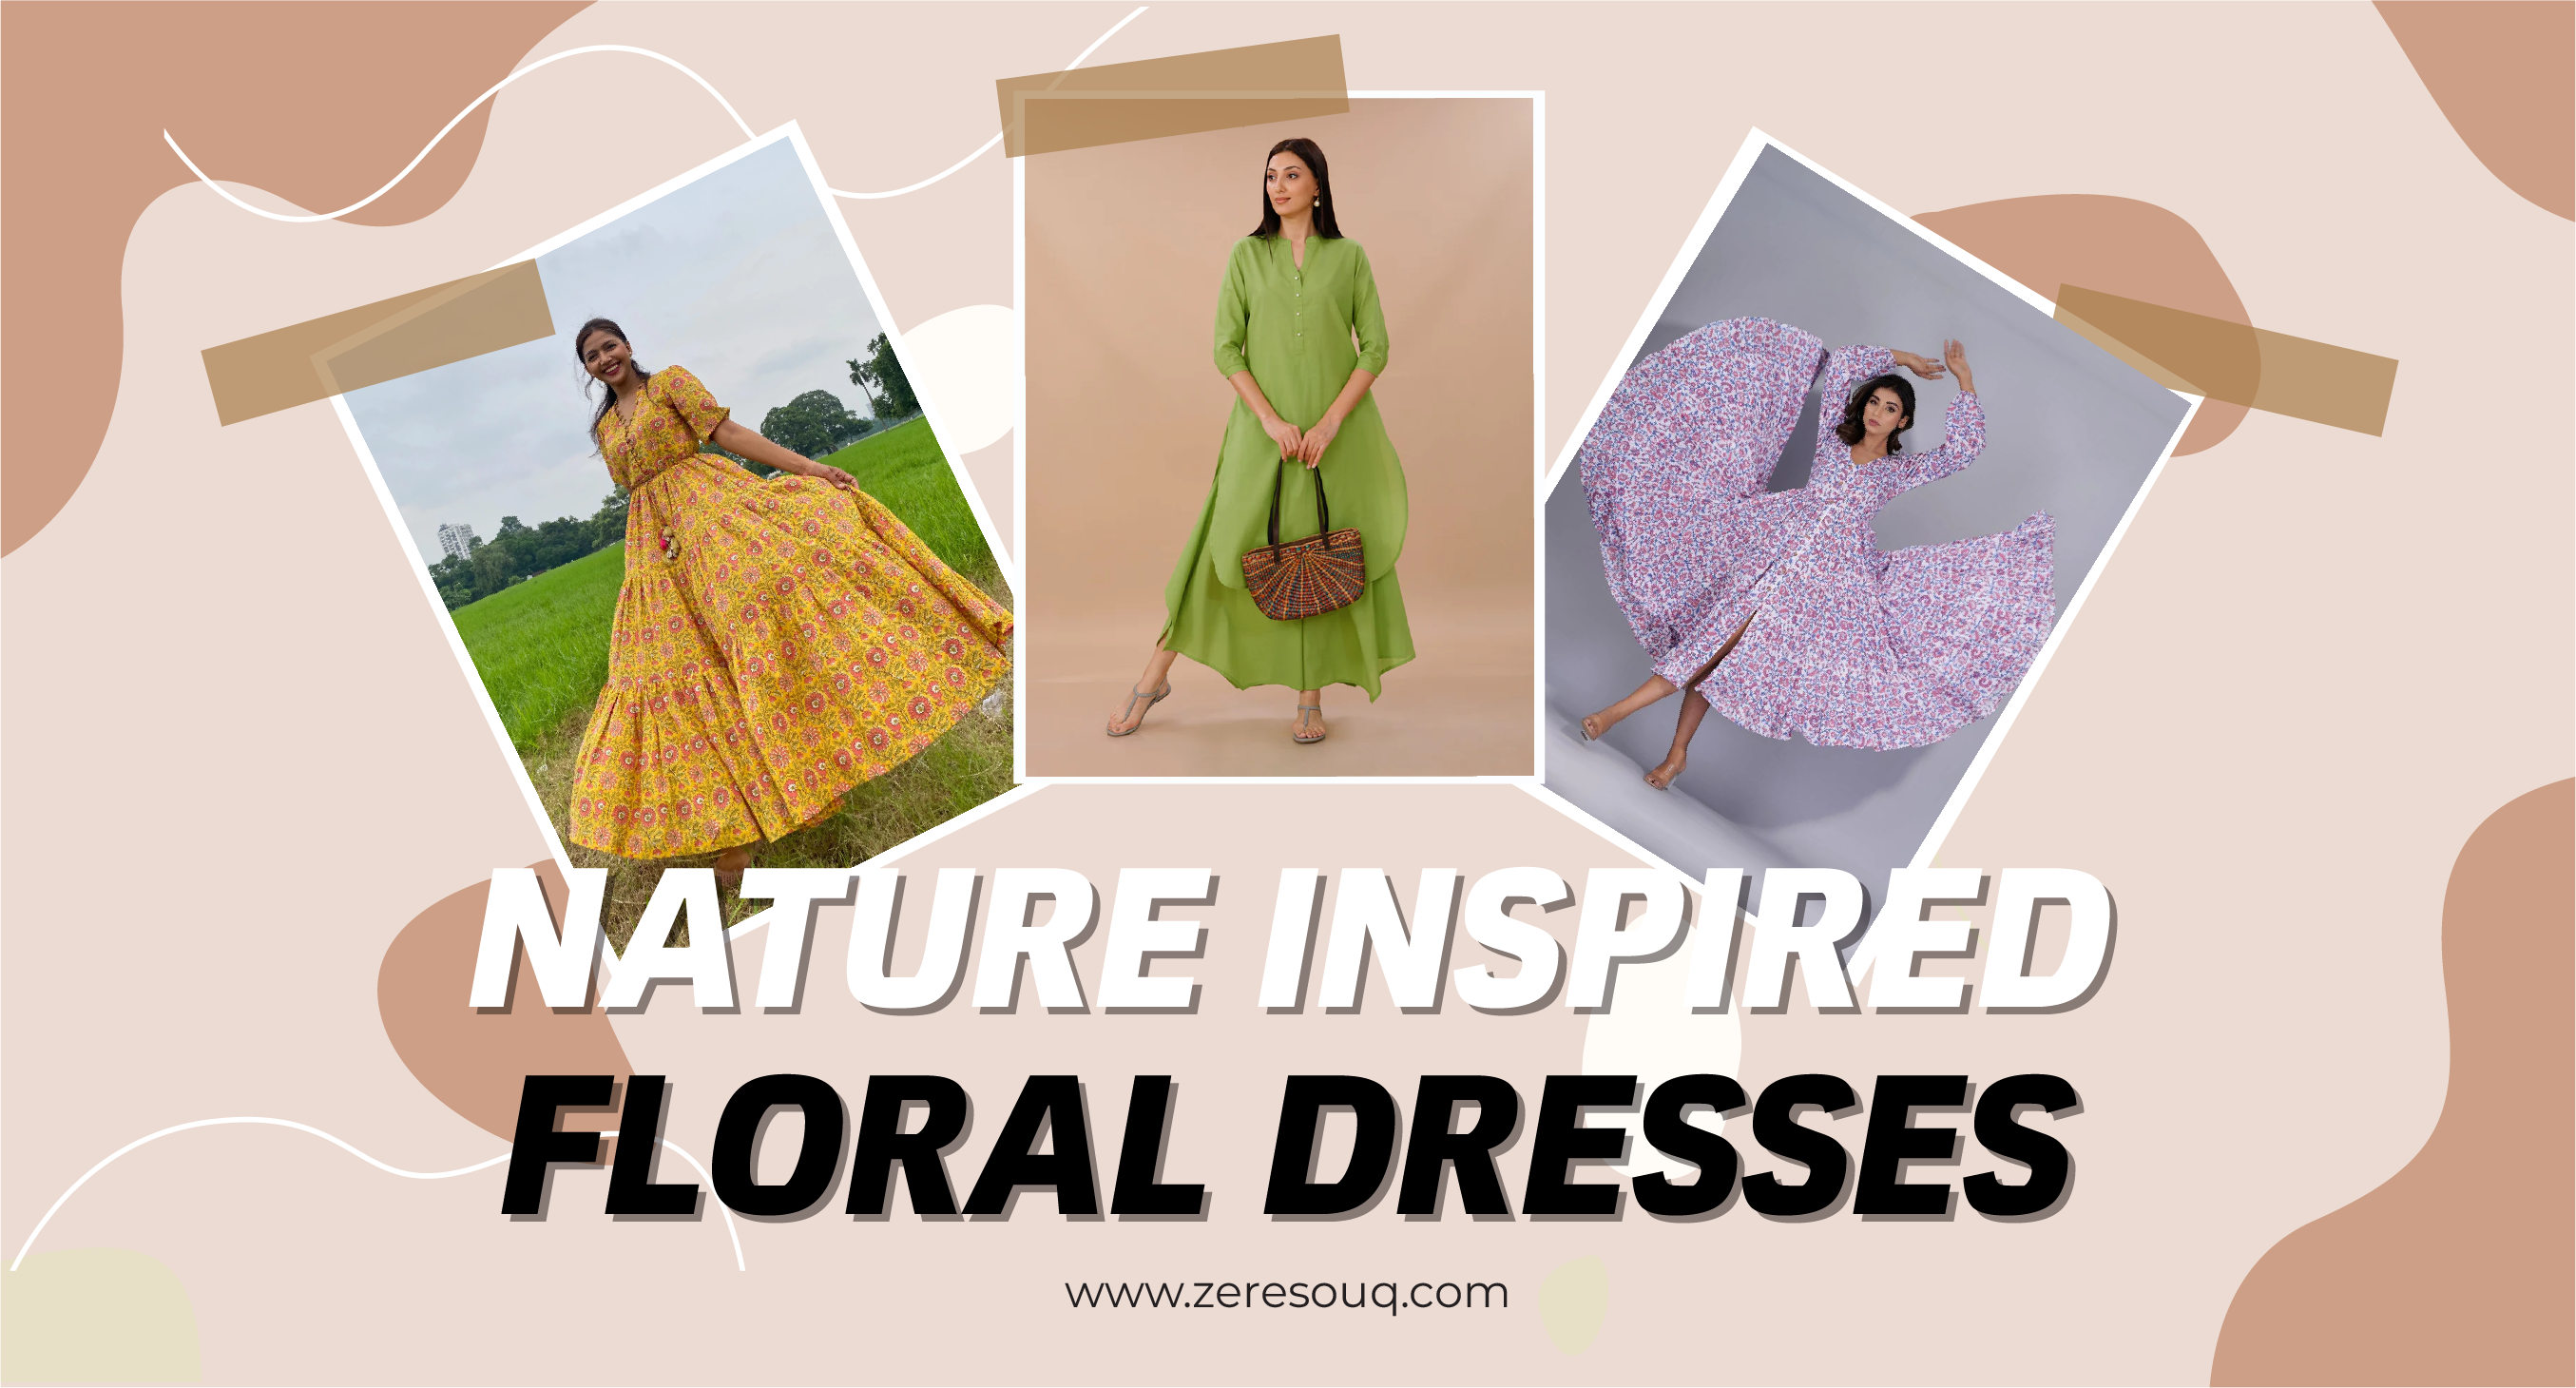 Floral Dresses - Embracing Nature's Beauty in Fashion